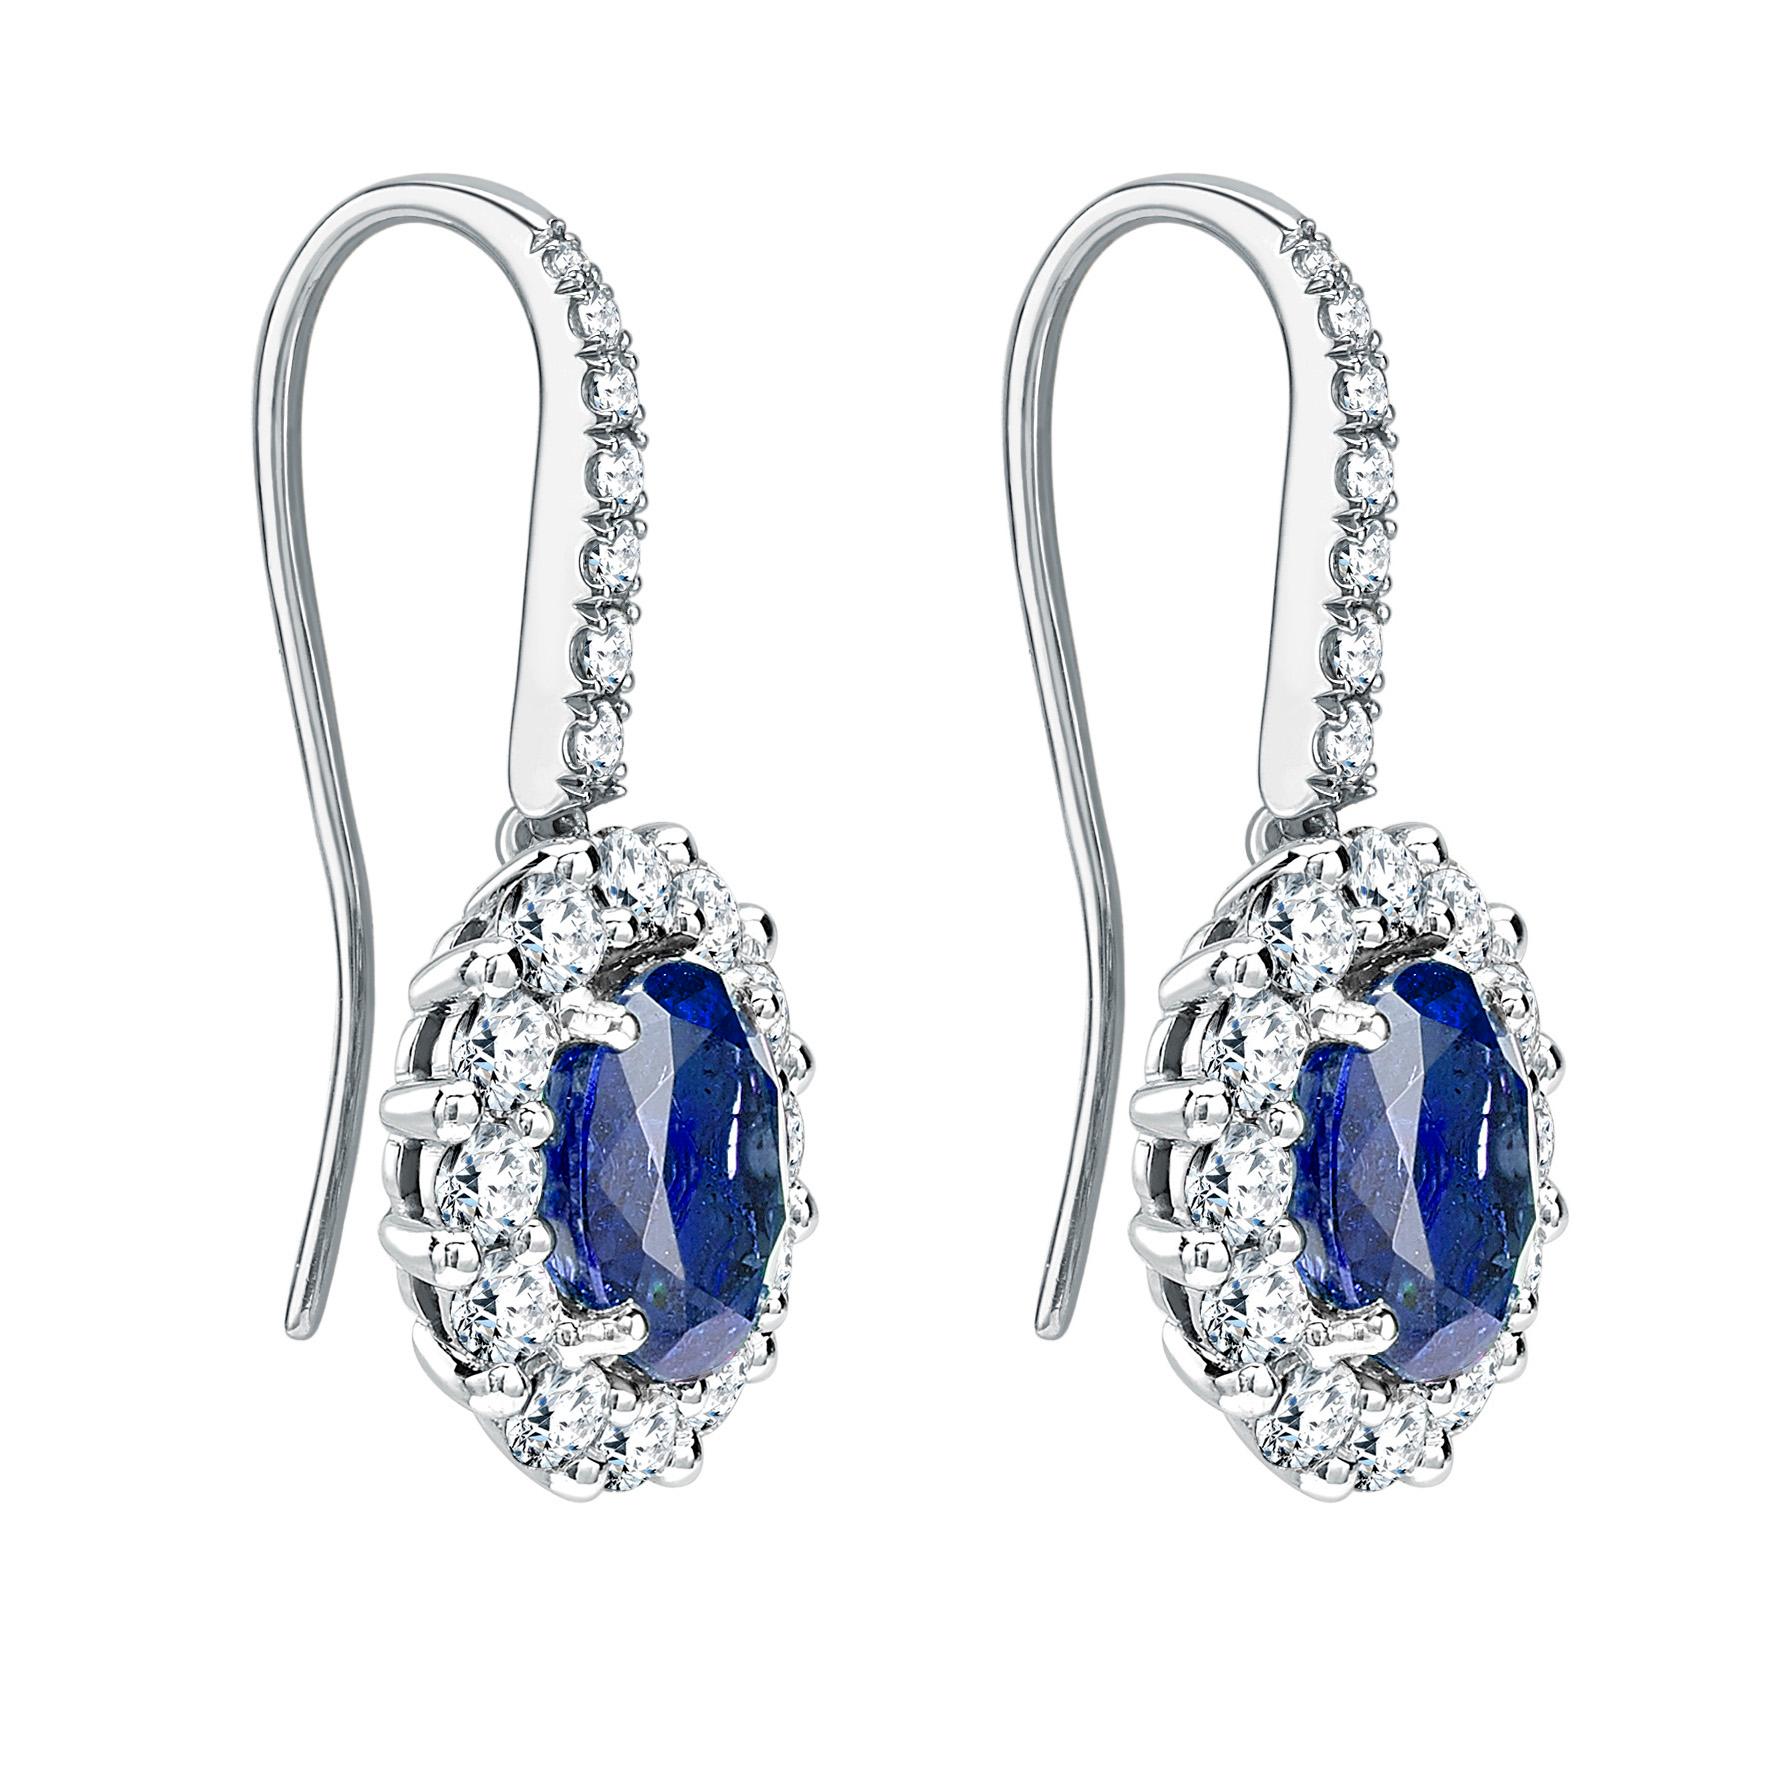 
A pair of House of Garrard platinum drop earrings from the 1735 collection each set with a central oval blue sapphire weighing 1.64 carats and 1.44 carats and 38 round white diamonds weighing 1.12 carats
2 oval blue sapphires weighing 1.64 carats